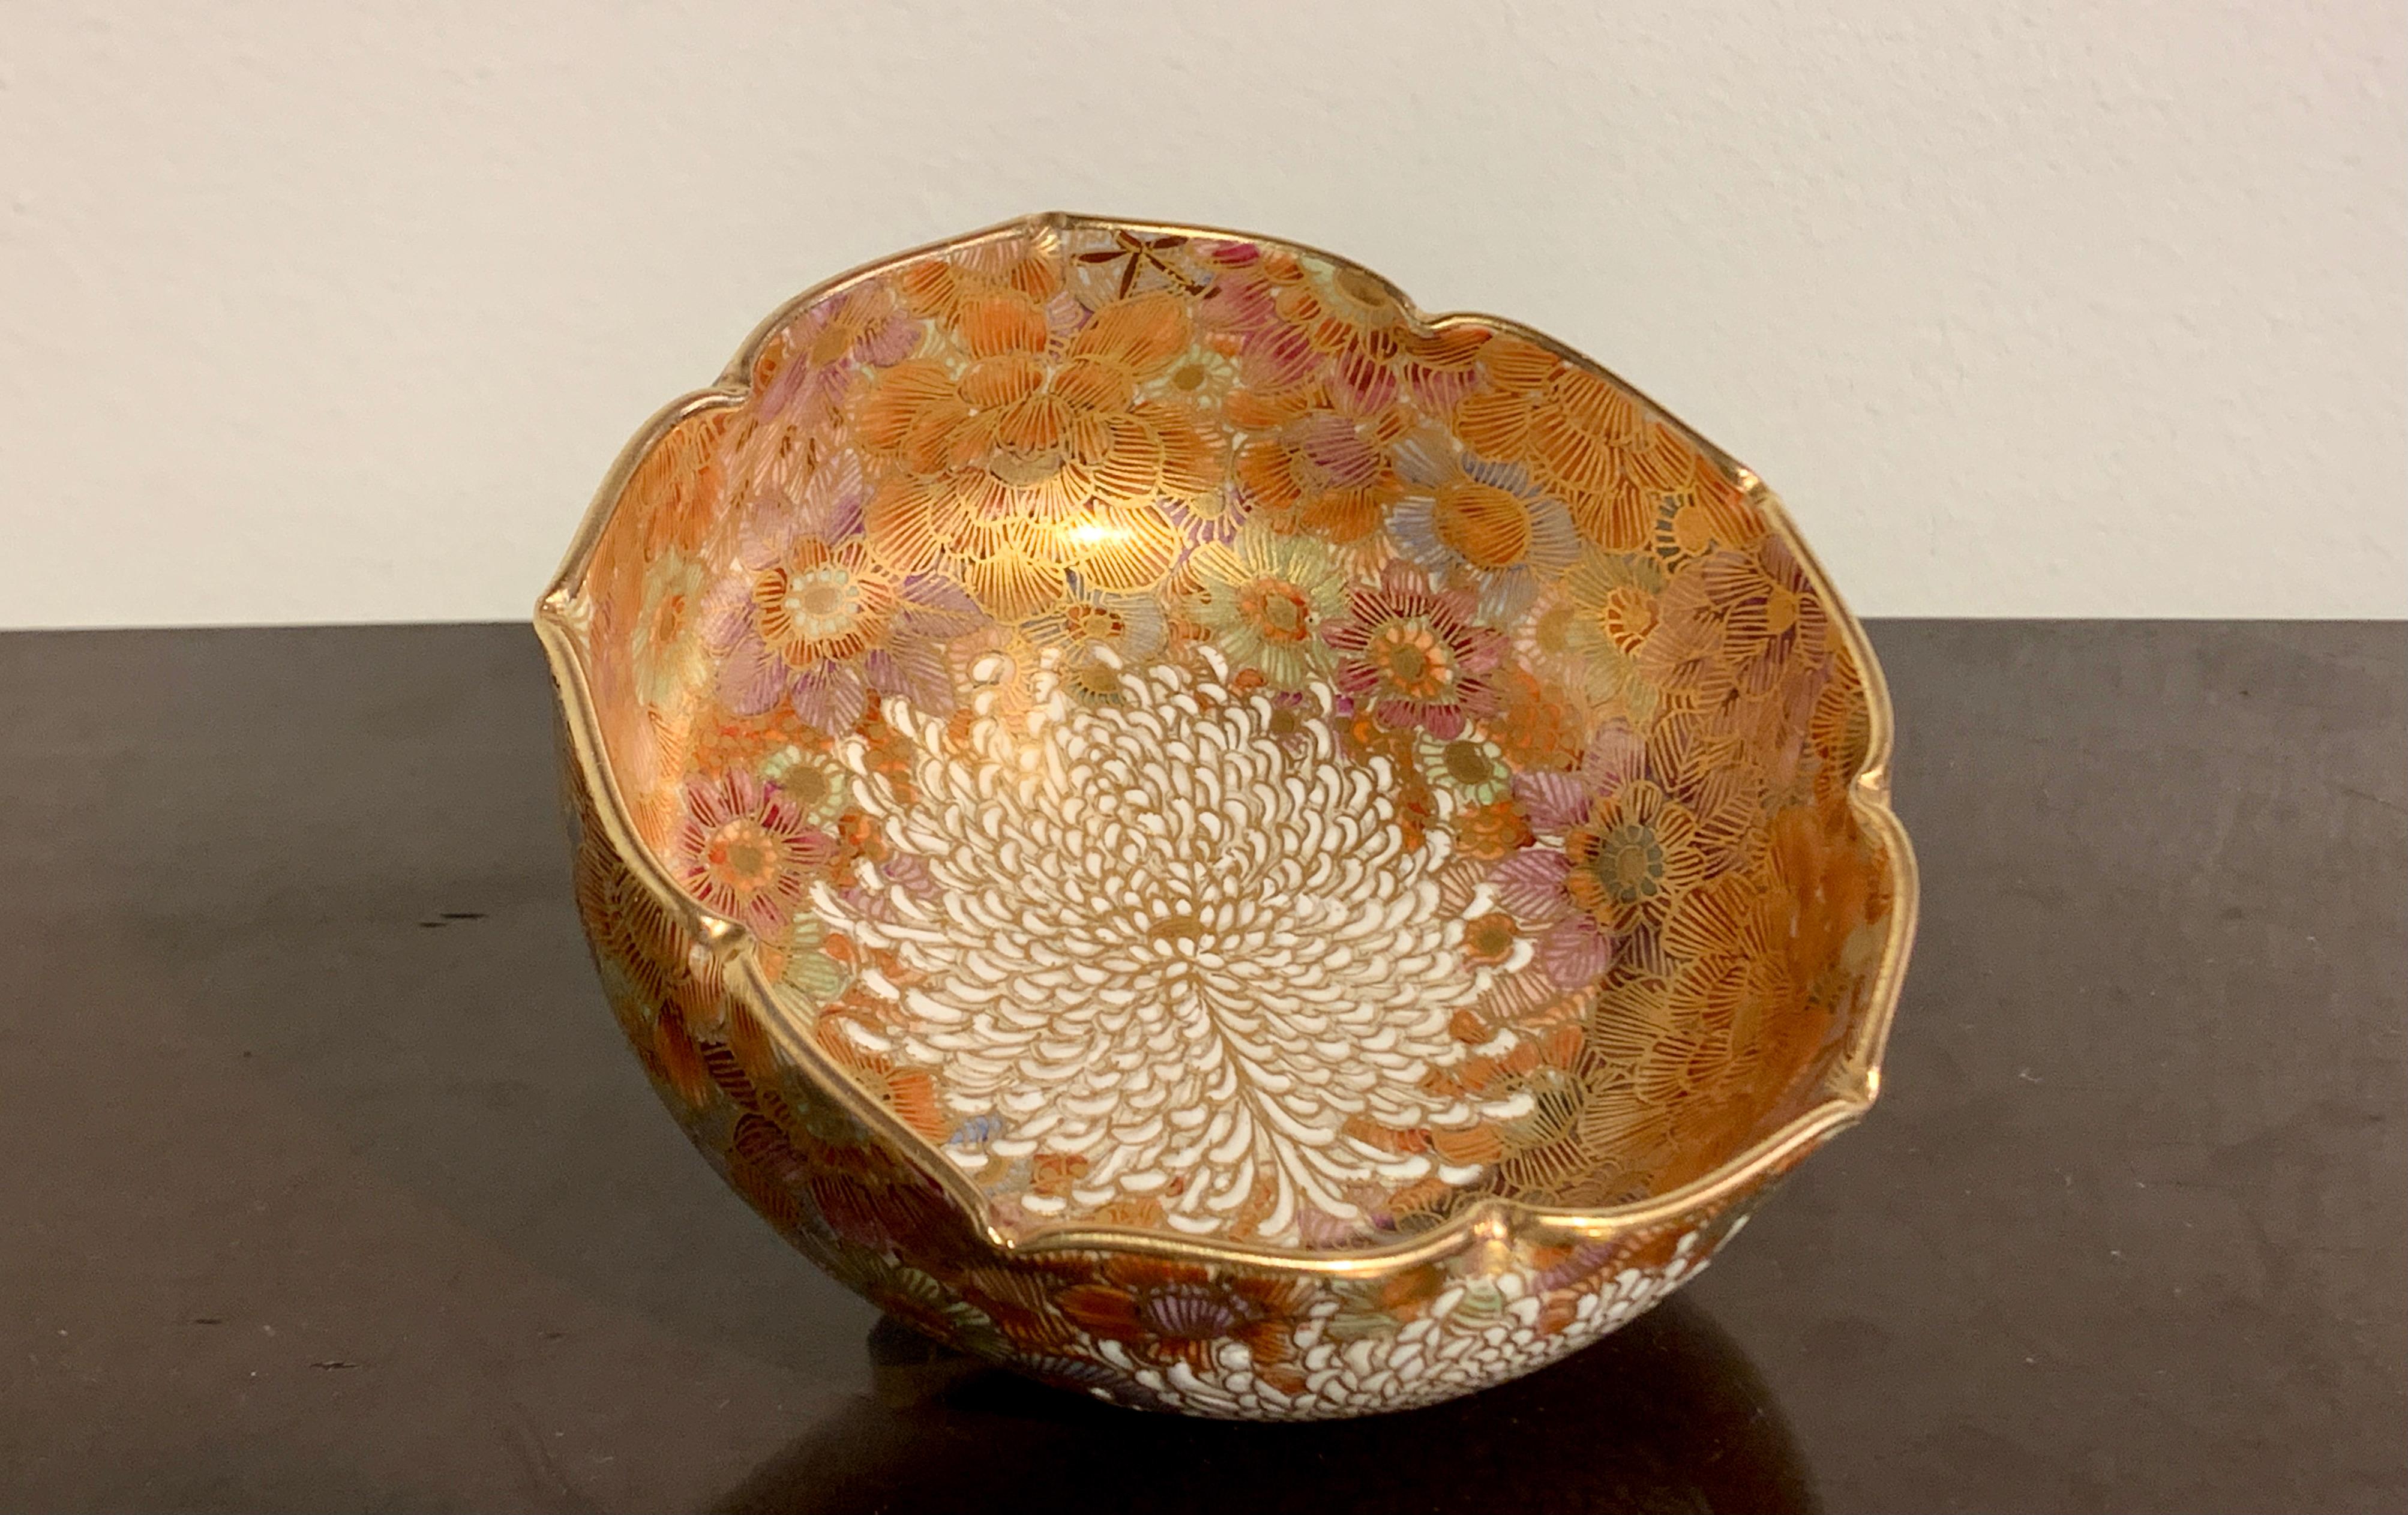 A fine and sumptuous Japanese Meiji period millefleur Satsuma moriage bowl by Shozan, circa 1900, Japan.

The shaped bowl of mallow form and decorated all over in a dense millefleur, or thousand flowers, design. A large chrysanthemum blossom in